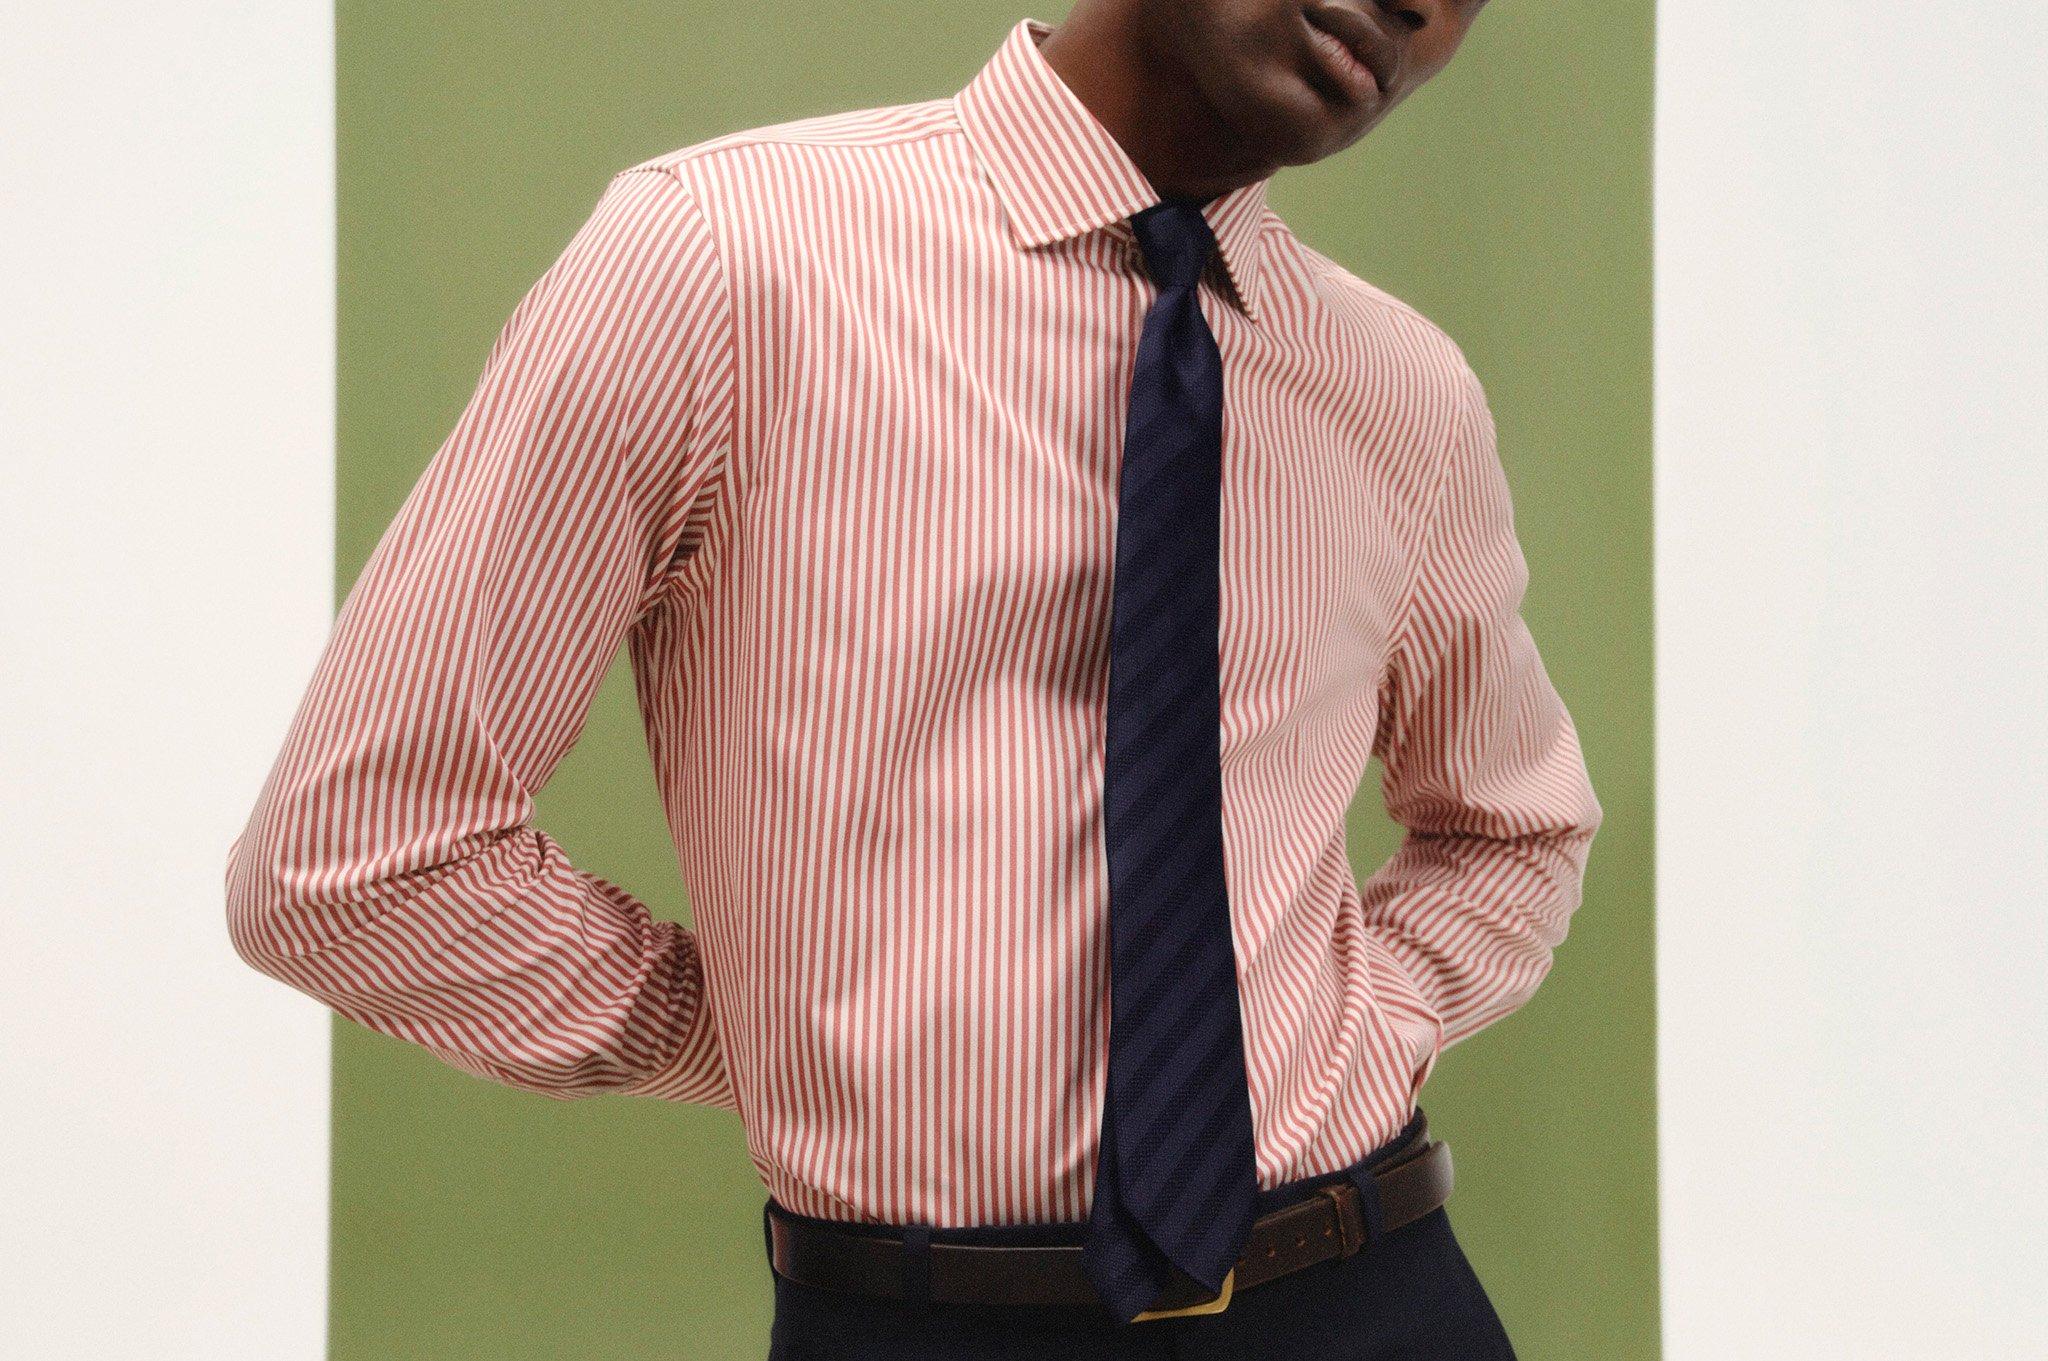 Thomas Pink Michael's Look  Casual shirts for men, Smart attire